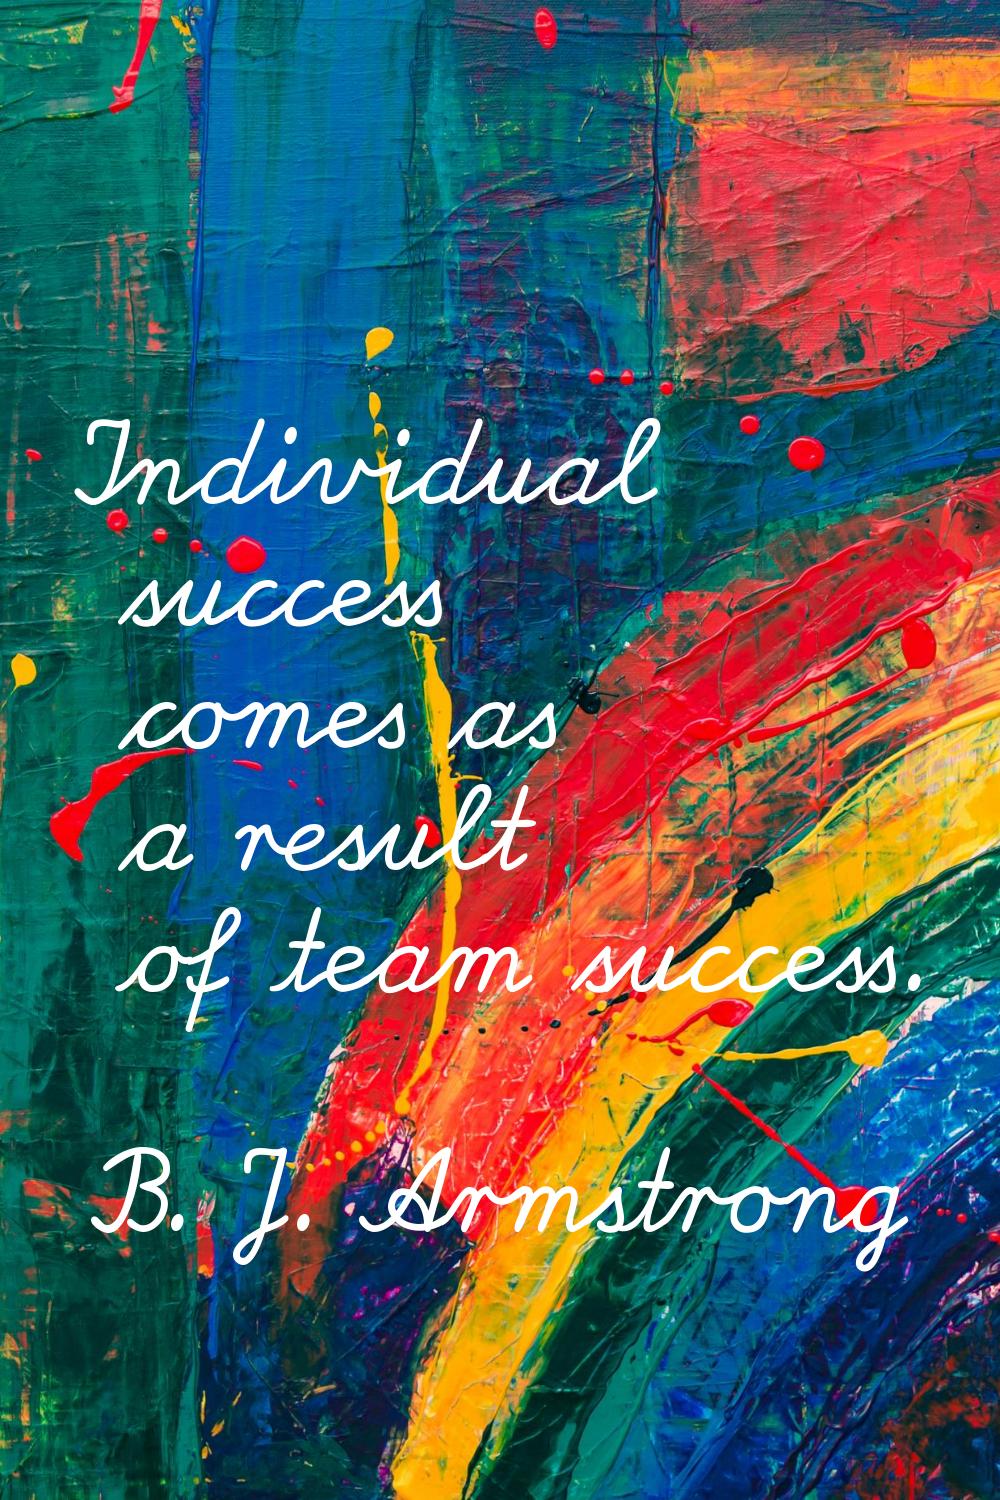 Individual success comes as a result of team success.